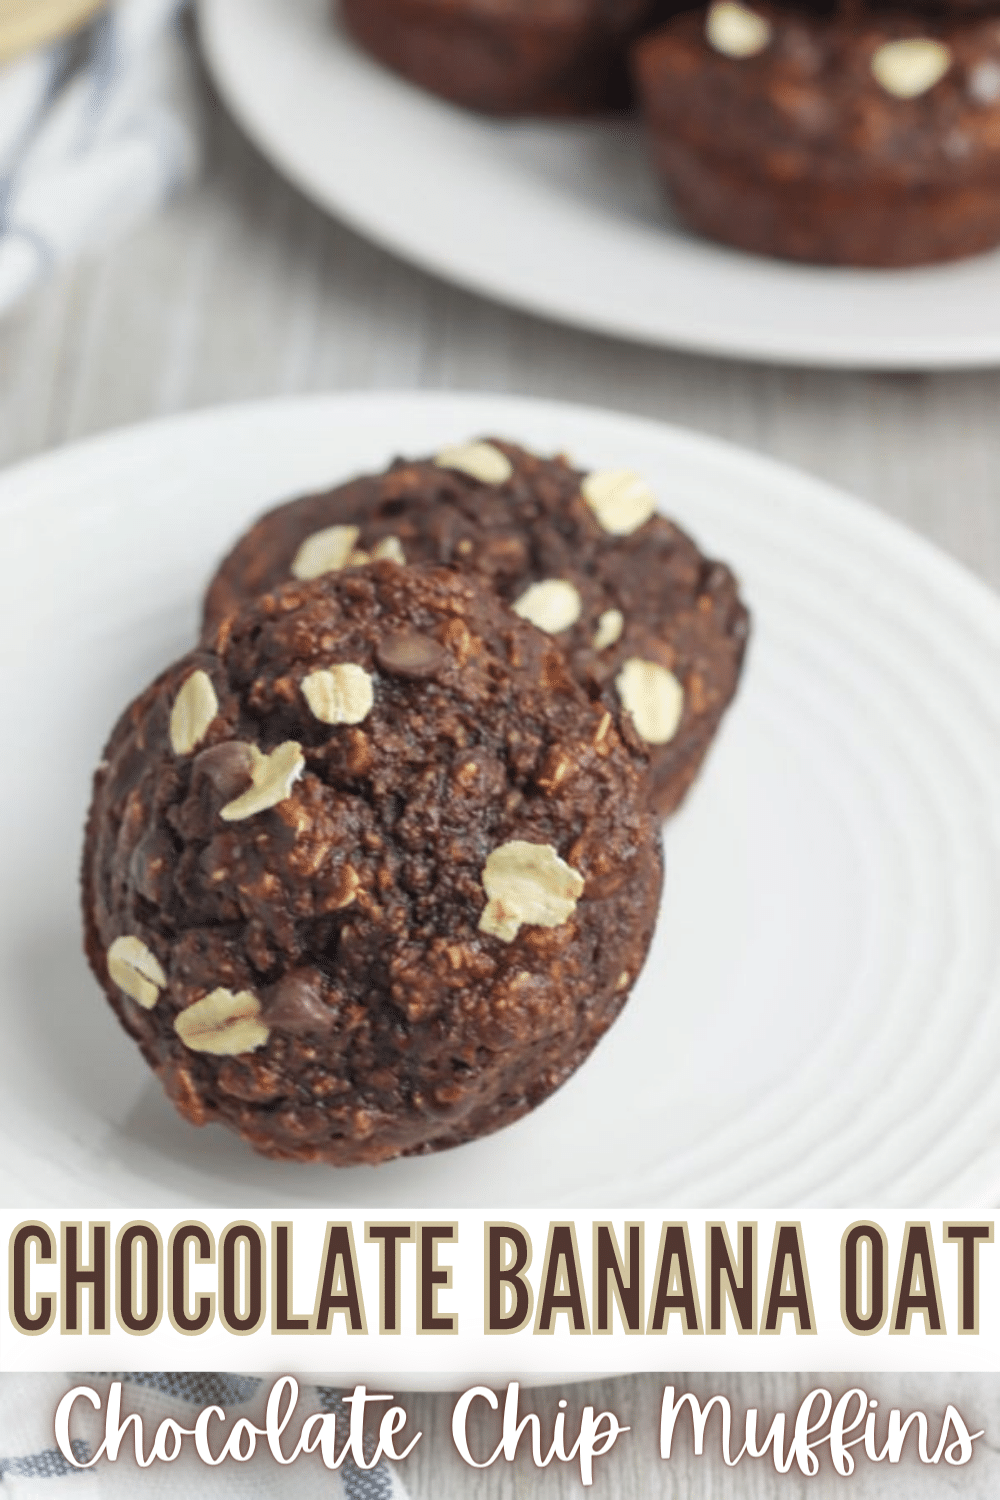 These Chocolate Banana Oat Chocolate Chip Muffins are packed with filling and healthy ingredients. Perfect for breakfast or snack time. #muffins #breakfast #myWW via @wondermomwannab